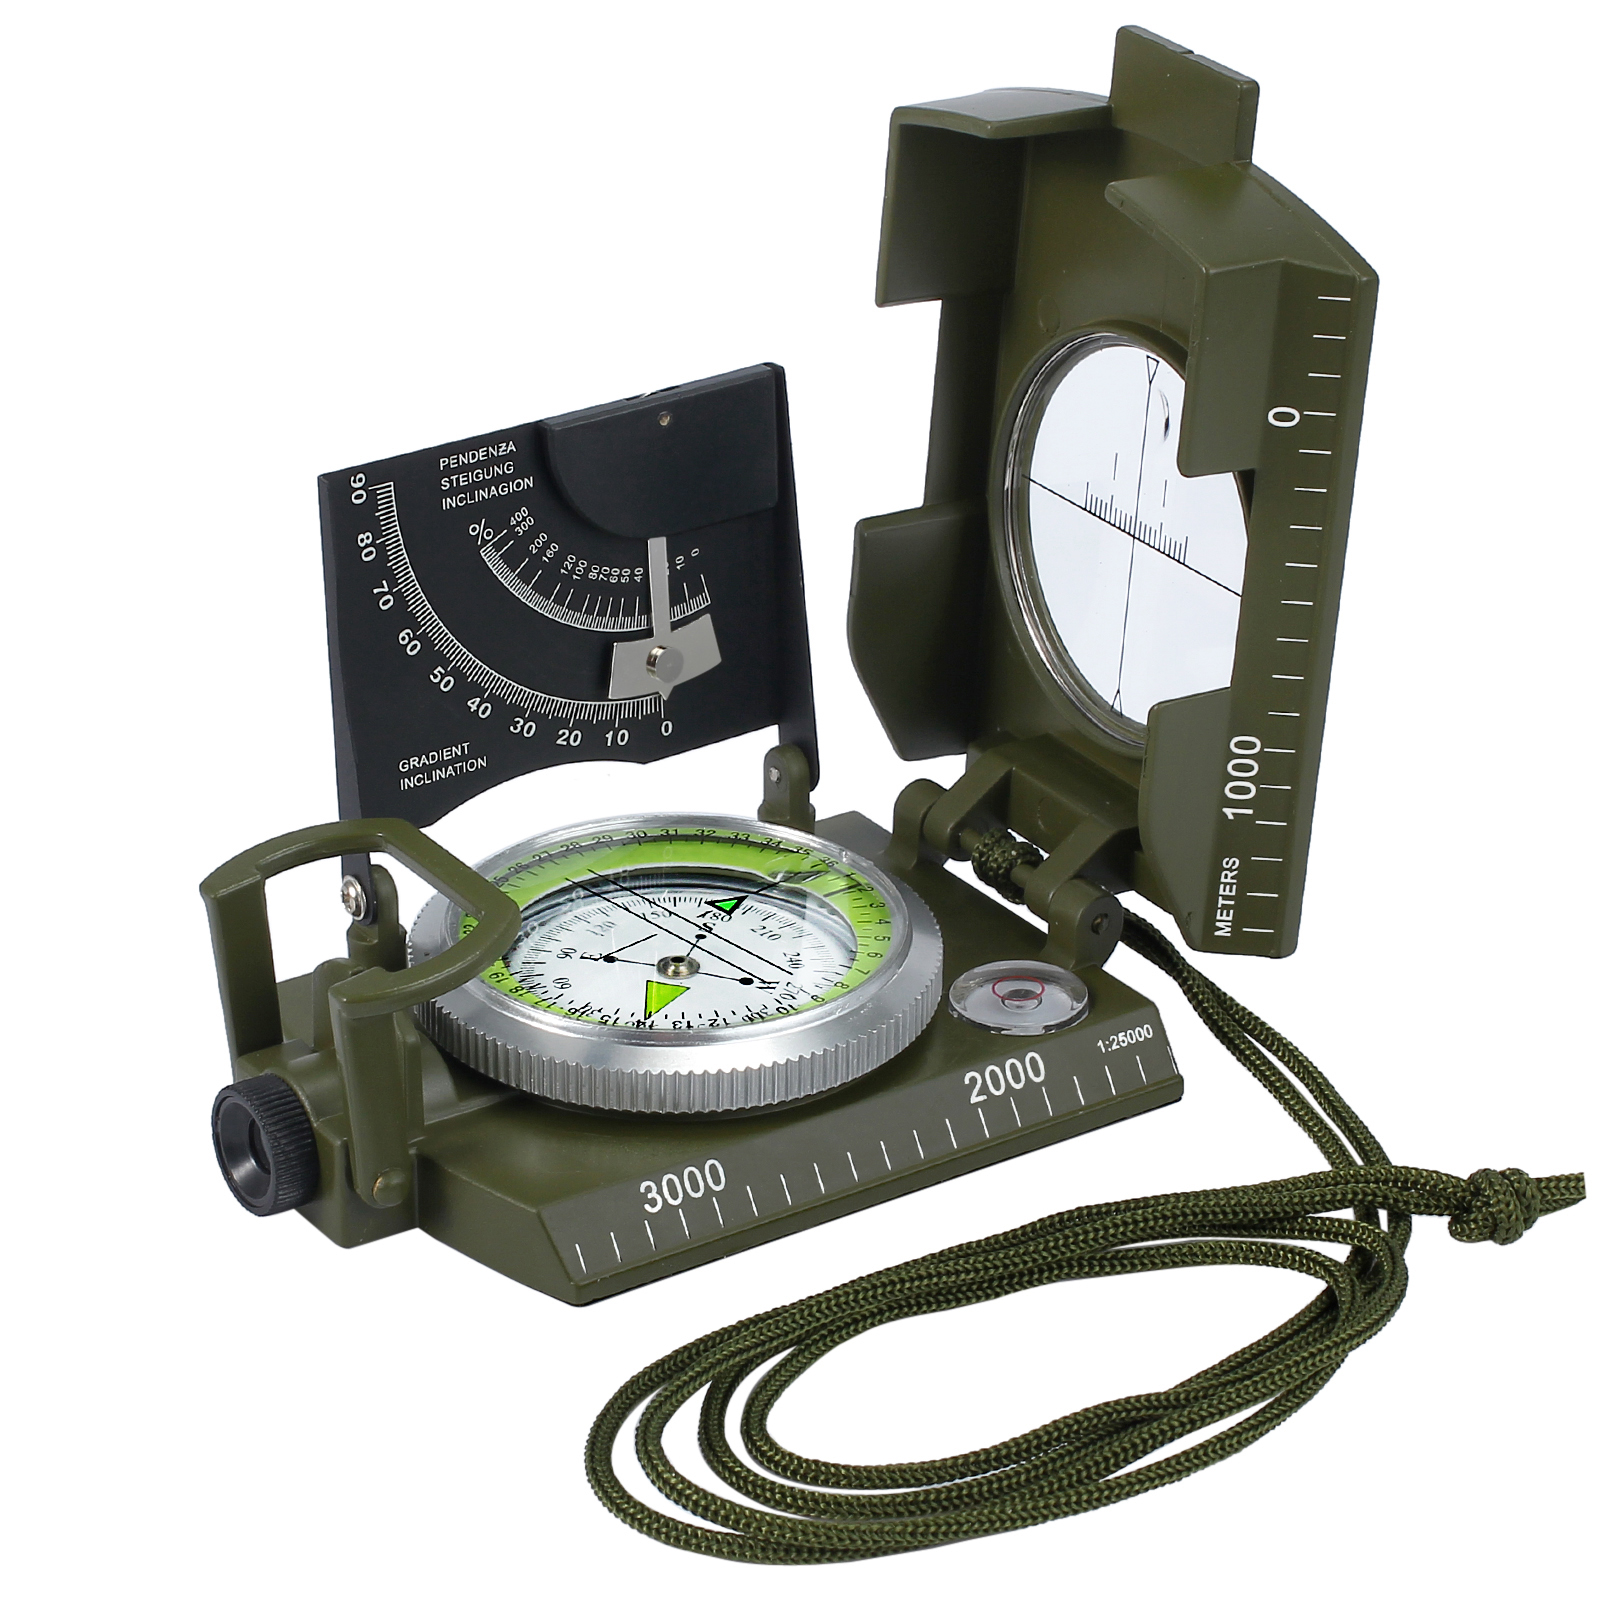 OEM Compass with Waterproof Multifunctional Metal Army Green Style for Camping, Hiking, Adventure, Positioning, Mapping - image 1 of 13